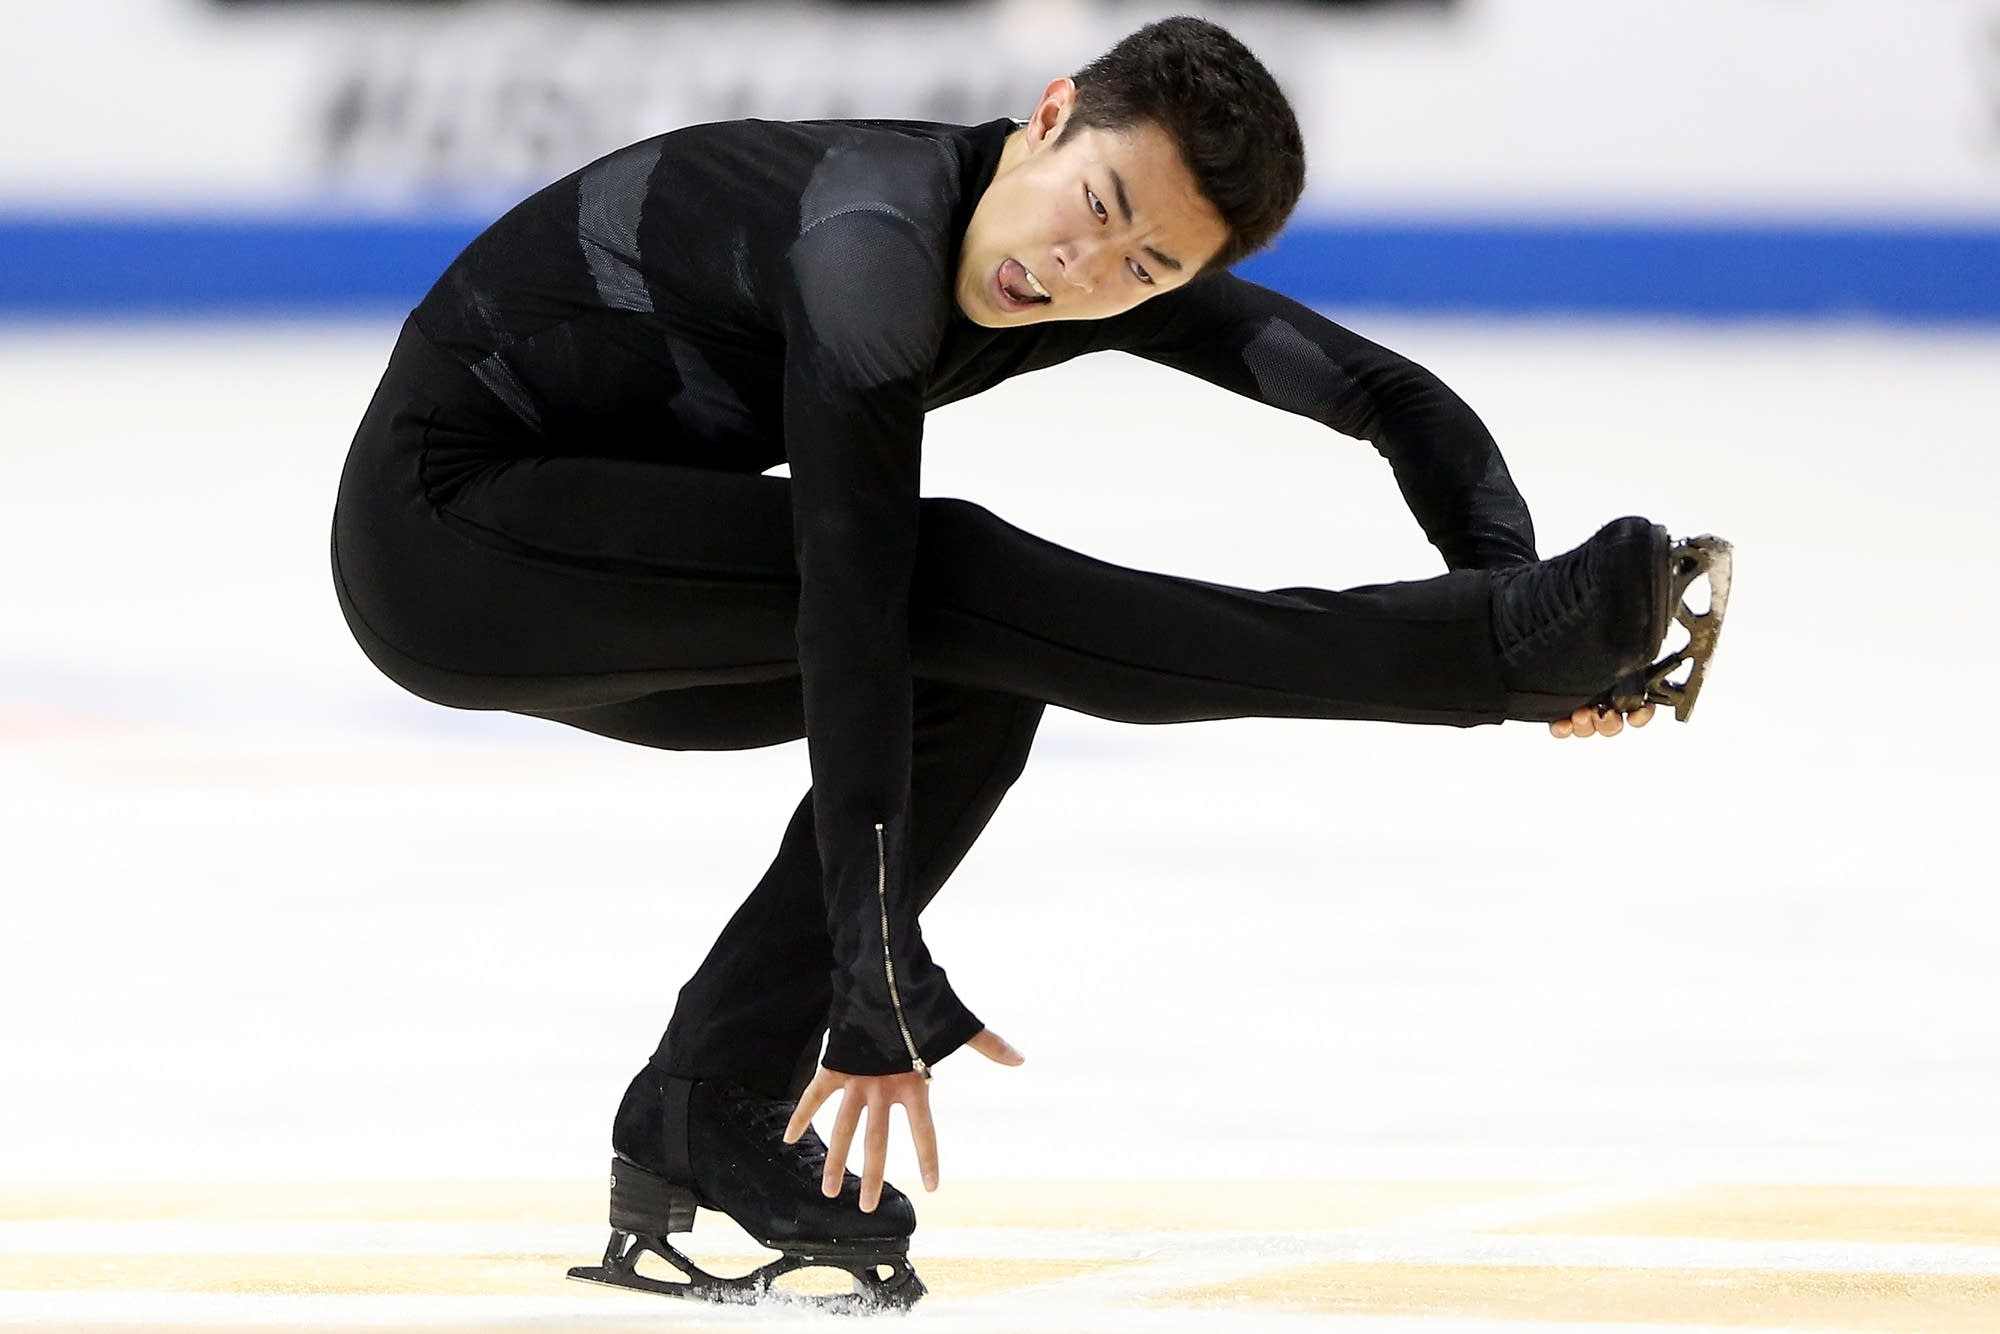 And the gold medal for figure skating goes to classical music ...